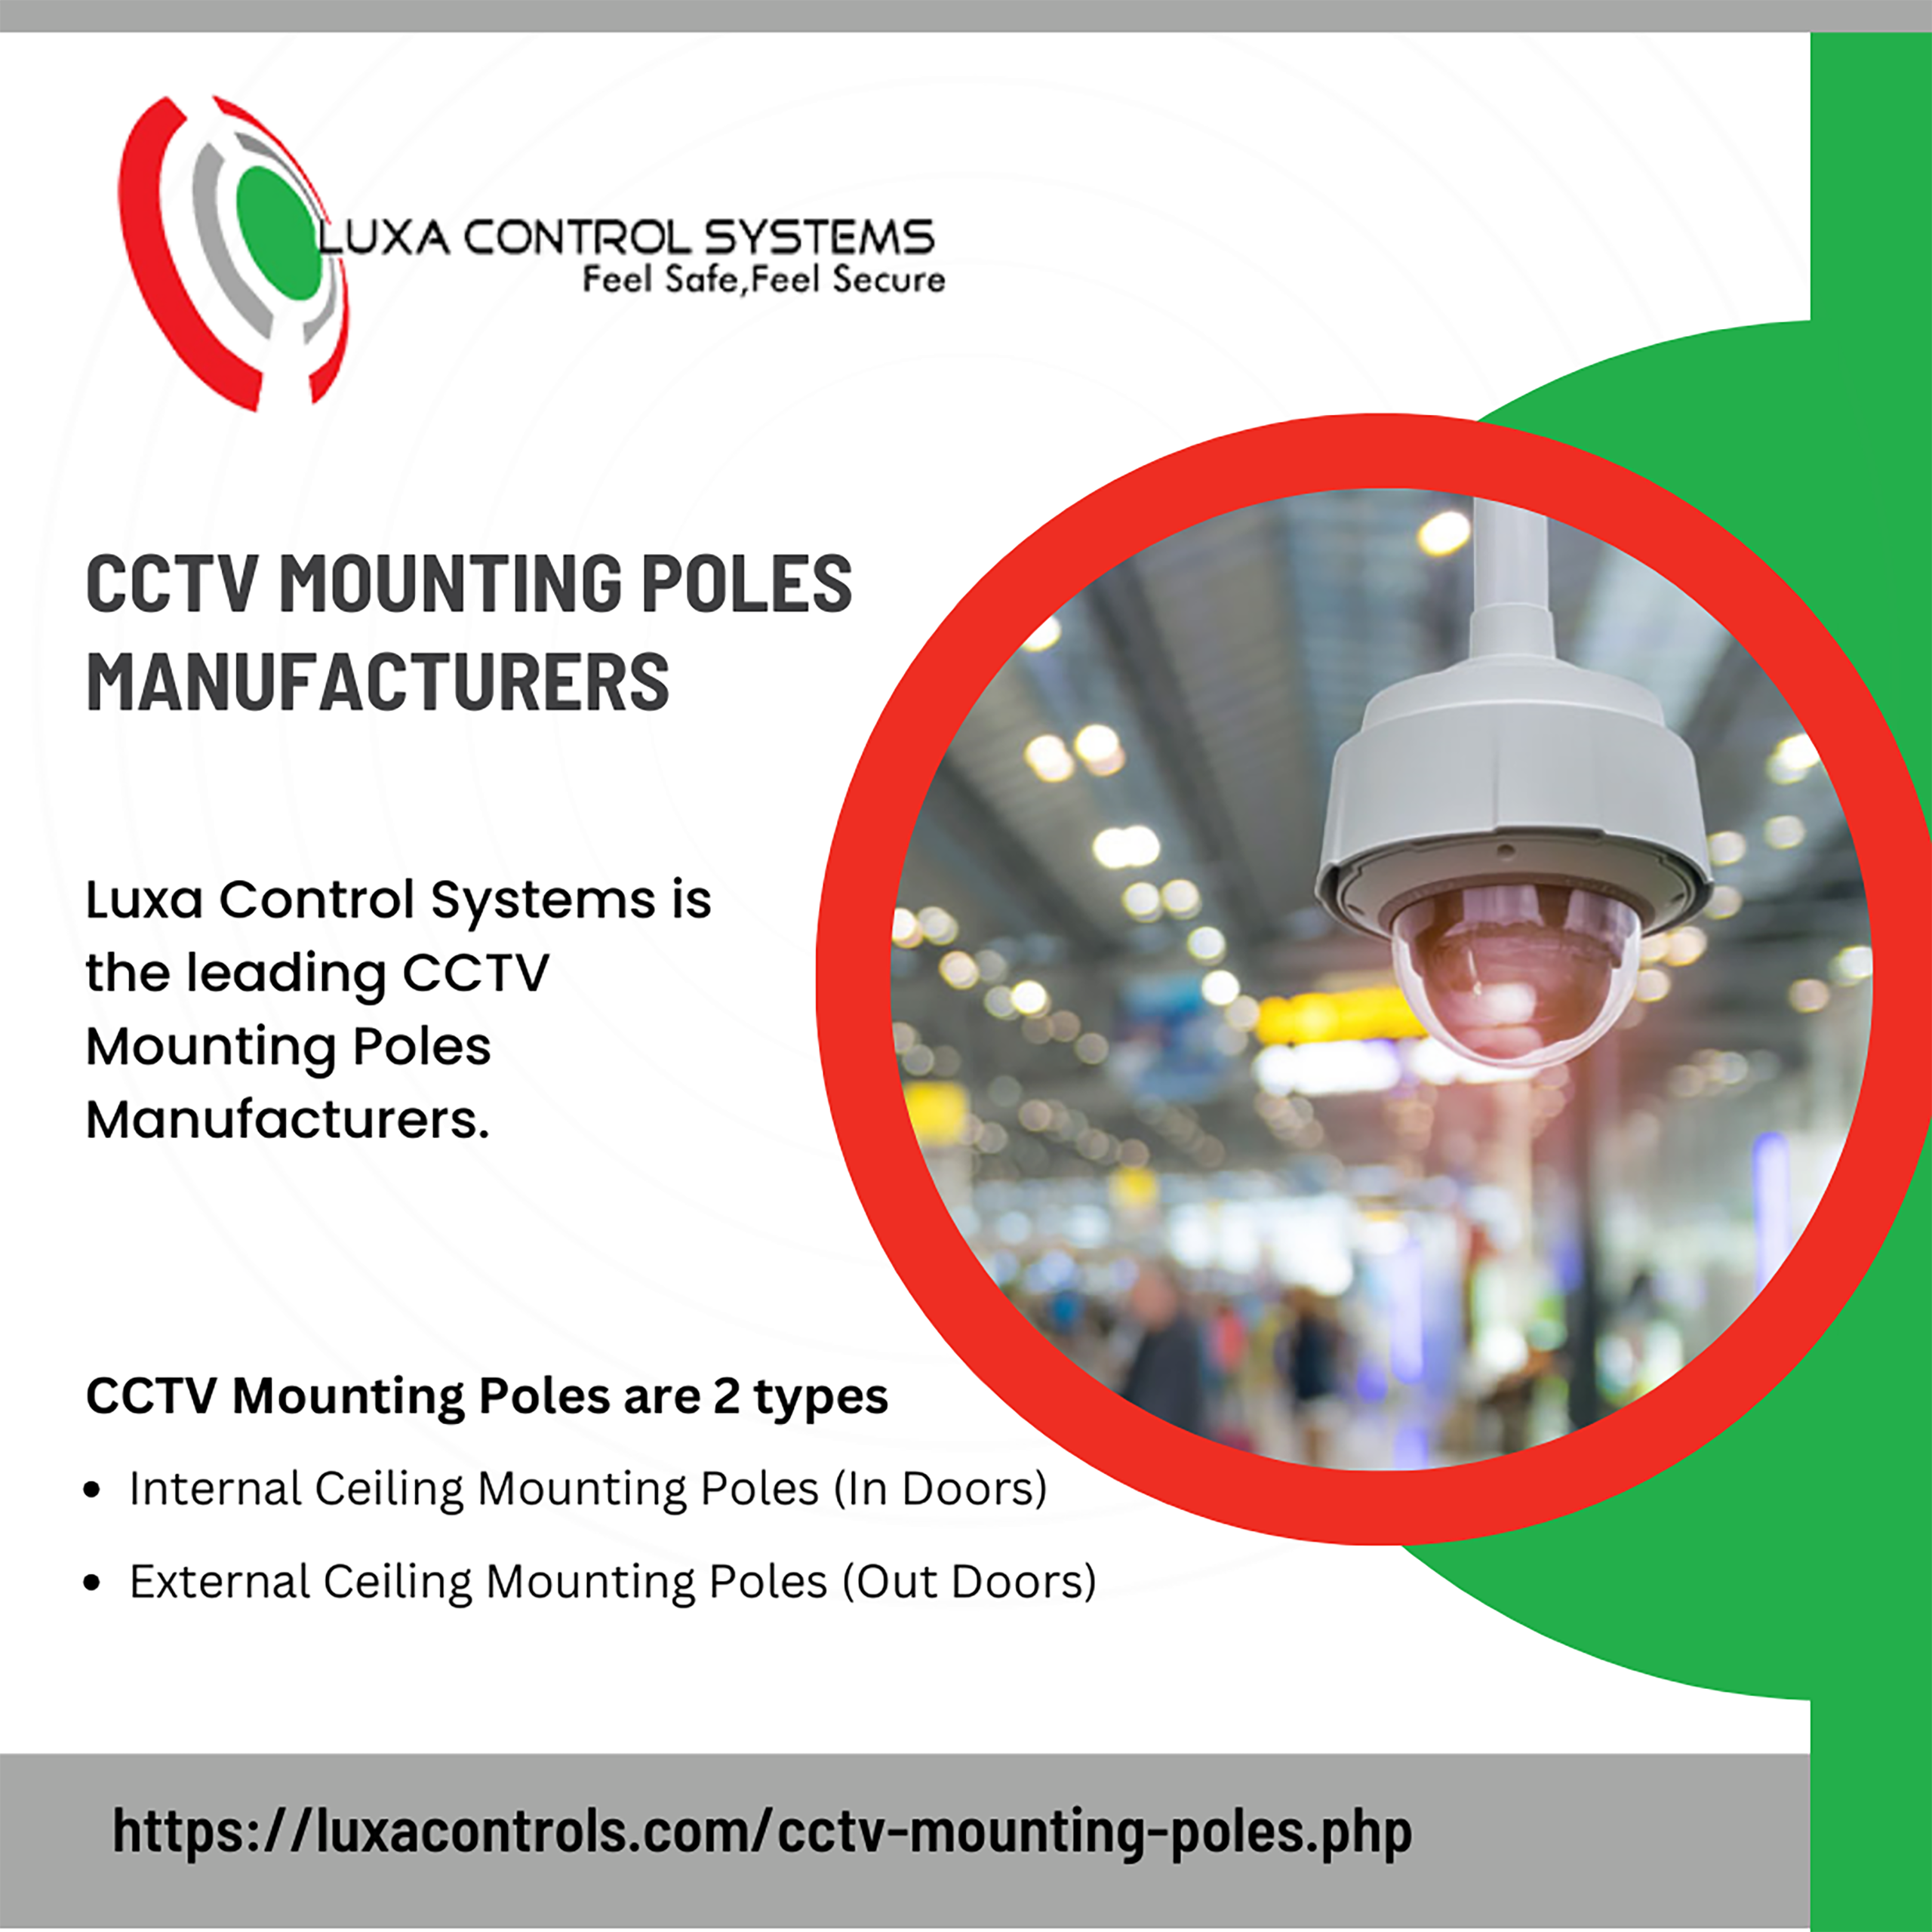 UXA CONTROL SYSTEMS

Feel Safe,Feel Secure

CCTV MOUNTING POLES
MANUFACTURERS

Luxa Control Systems is
the leading CCTV
Mounting Poles
Manufacturers.

CCTV Mounting Poles are 2 types

a

El . )
Pw
LW

* Internal Ceiling Mounting Poles (In Doors)

e External Ceiling Mounting Poles (Out Doors)